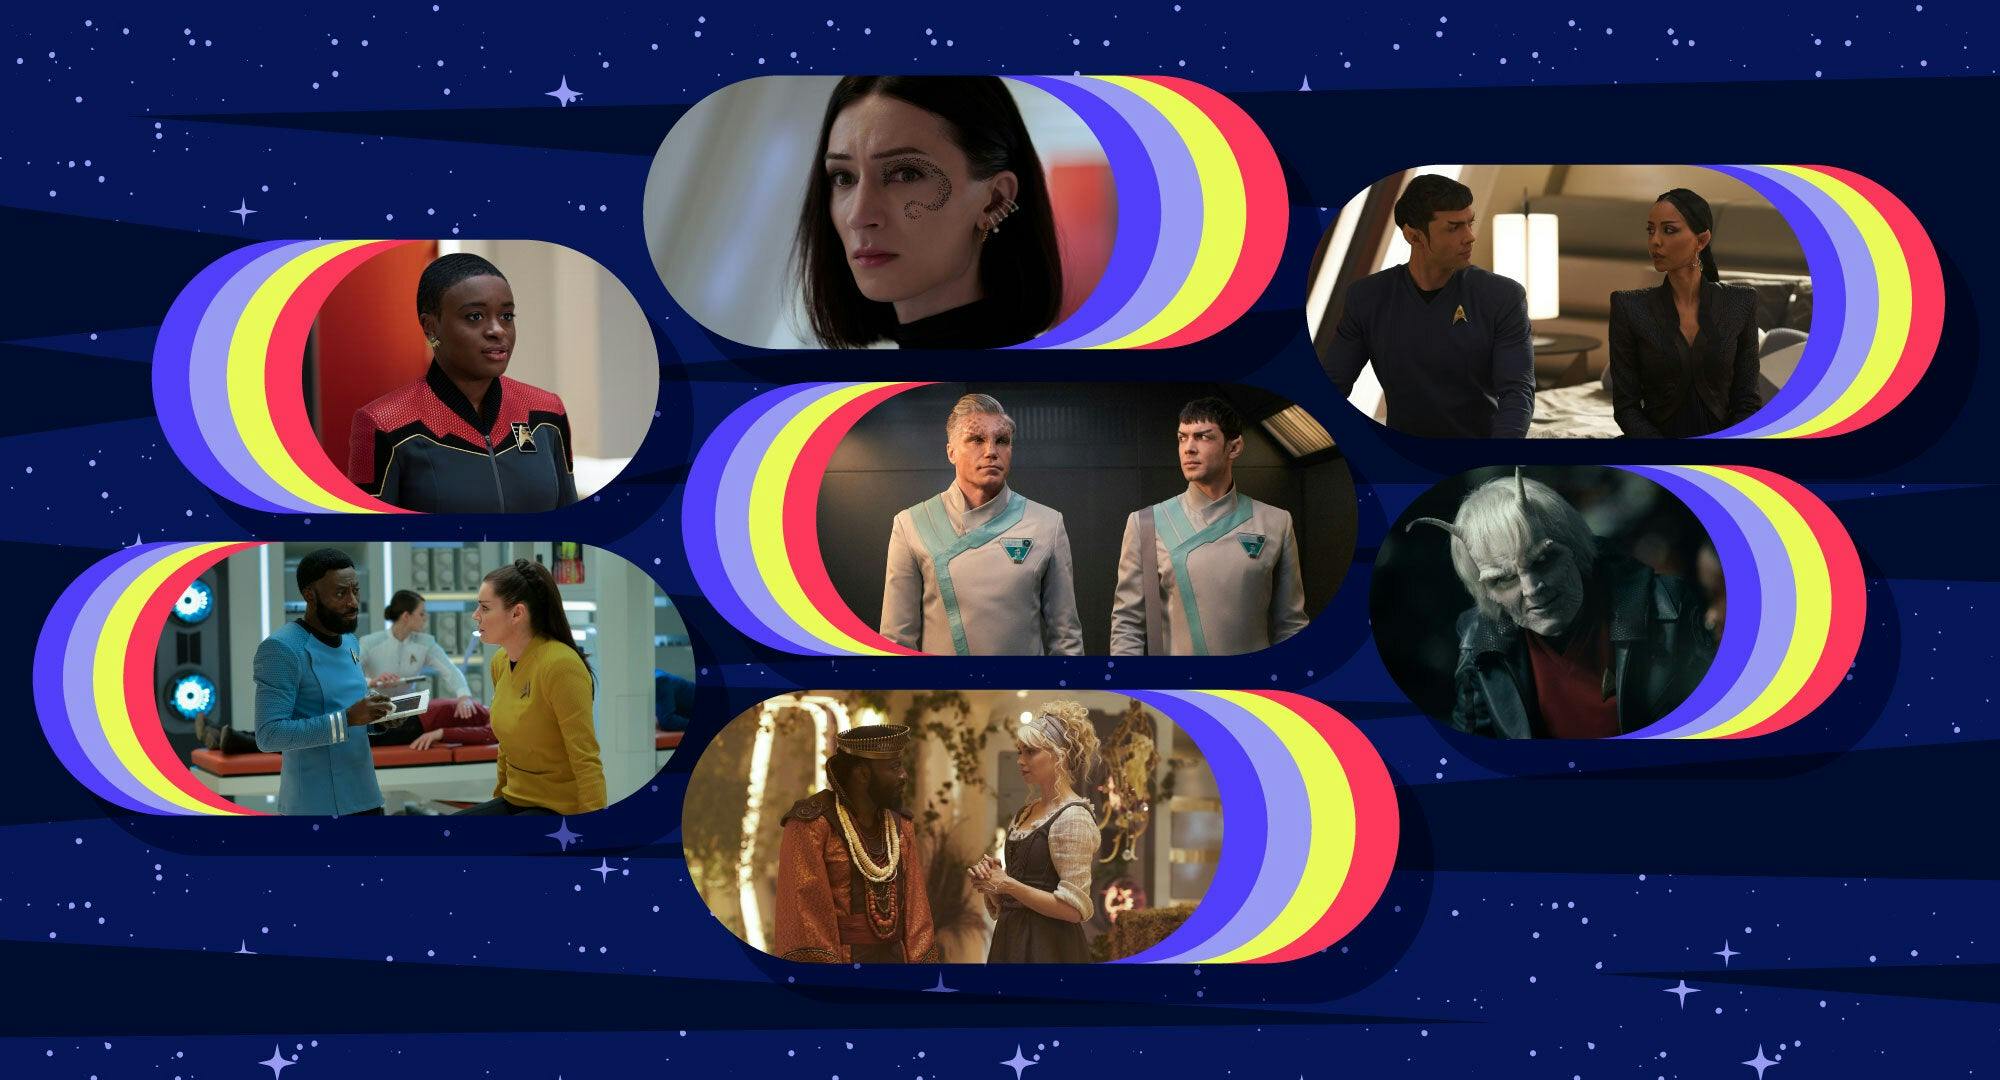 Illustrated banner featuring key moments from Season 1 of Star Trek: Strange New Worlds